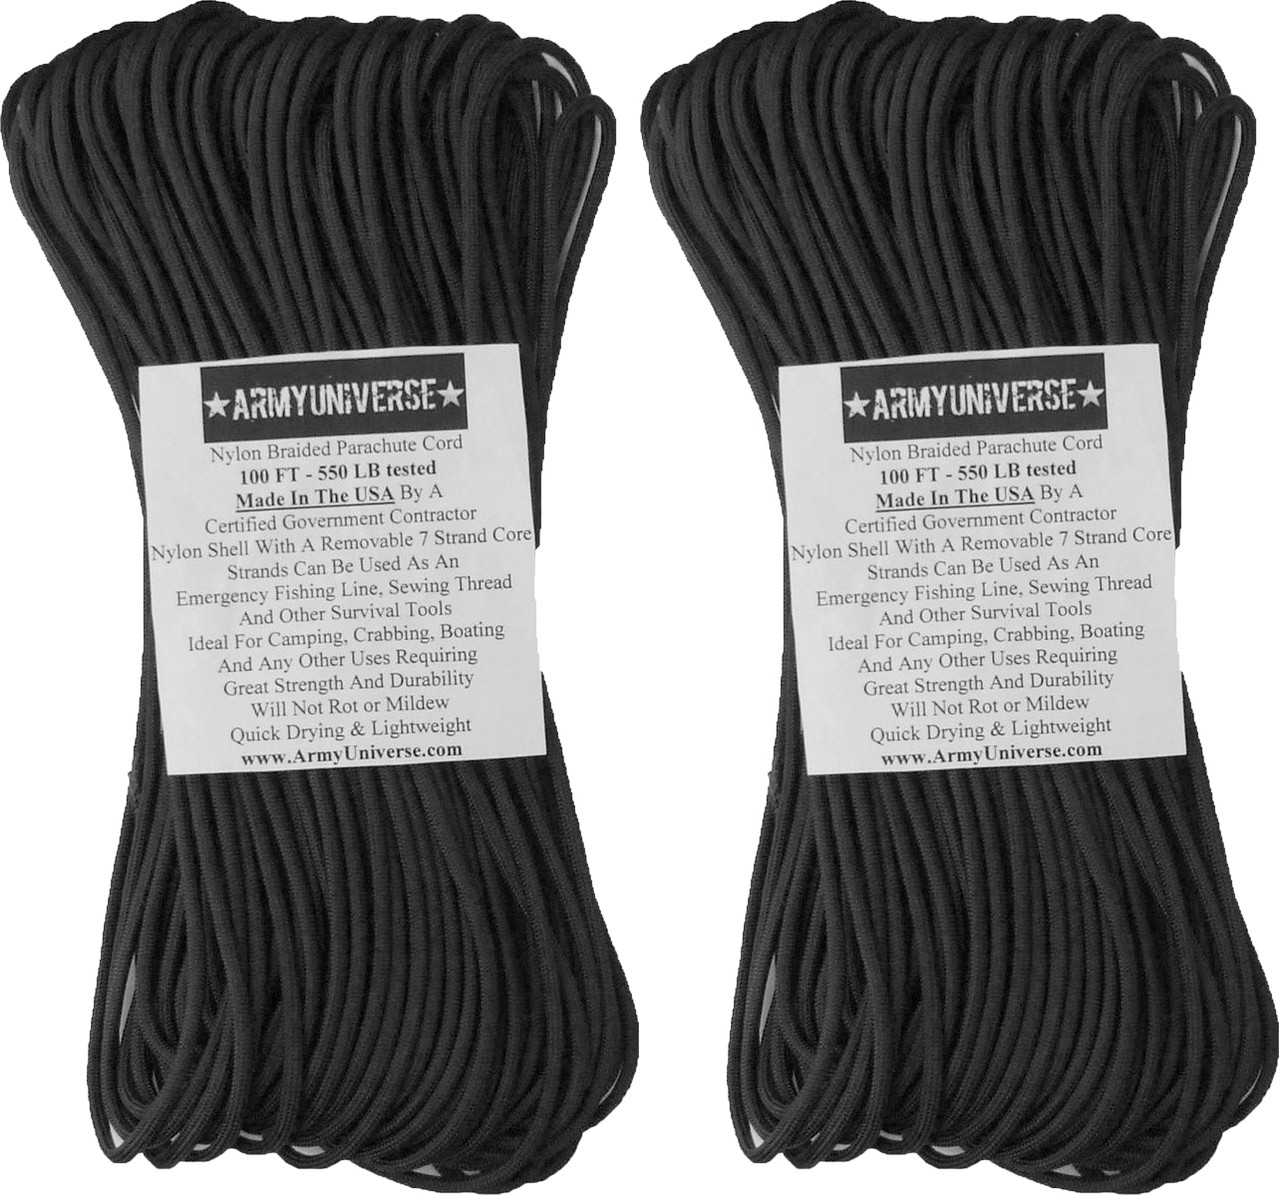 Army Universe Black 550lb Military Paracord Type III Rope 100' (2